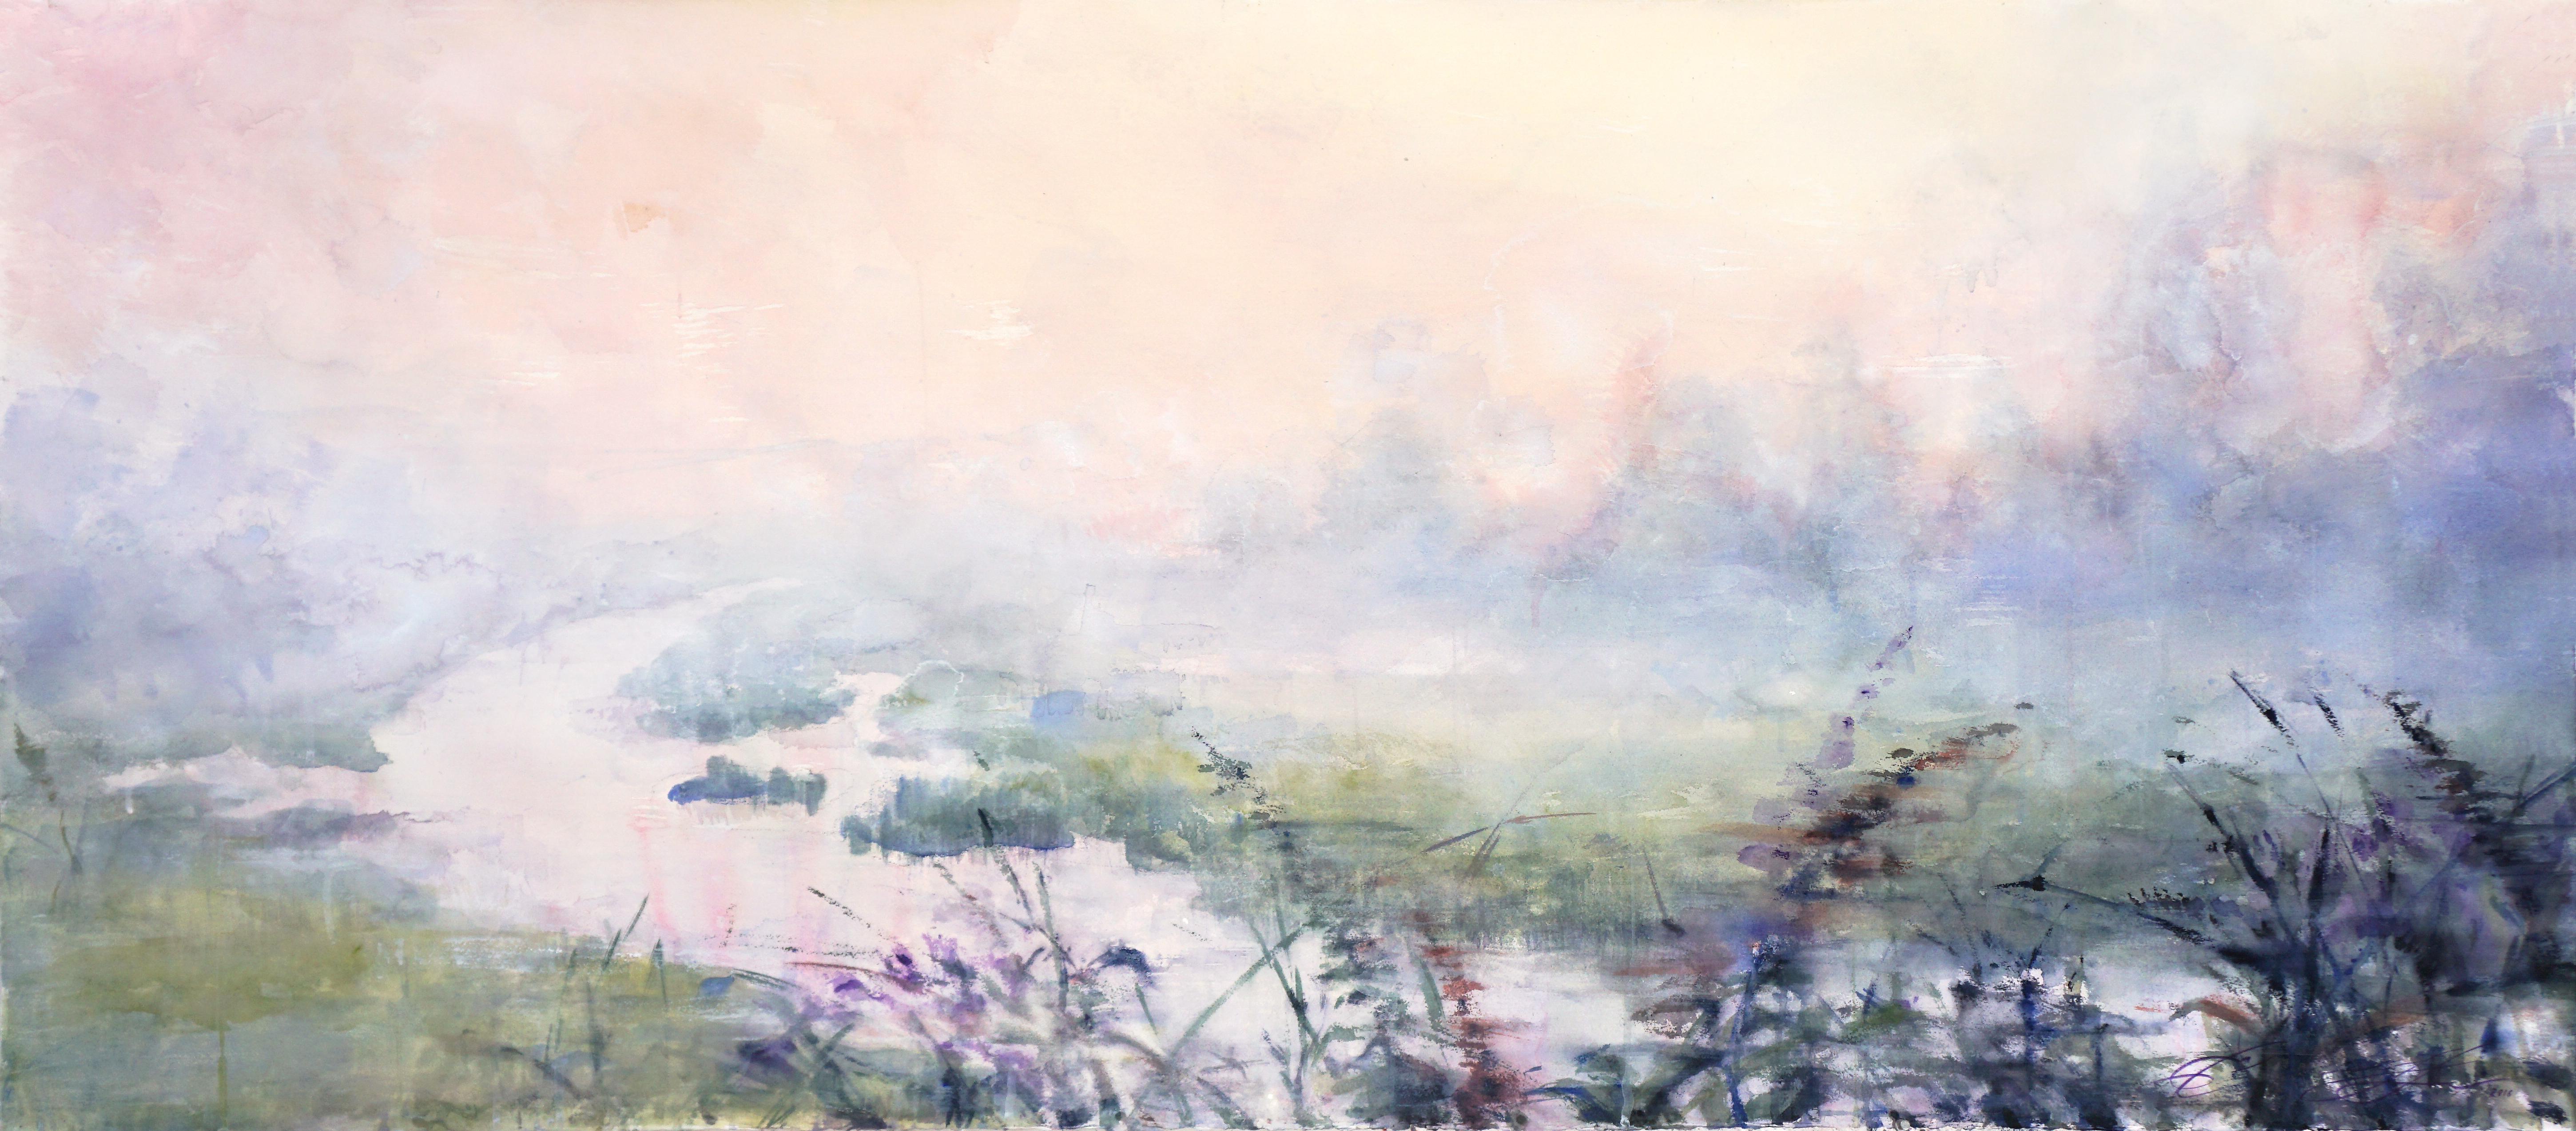 Morning Light - 21st Century, Contemporary, Landscape, Watercolor on Paper